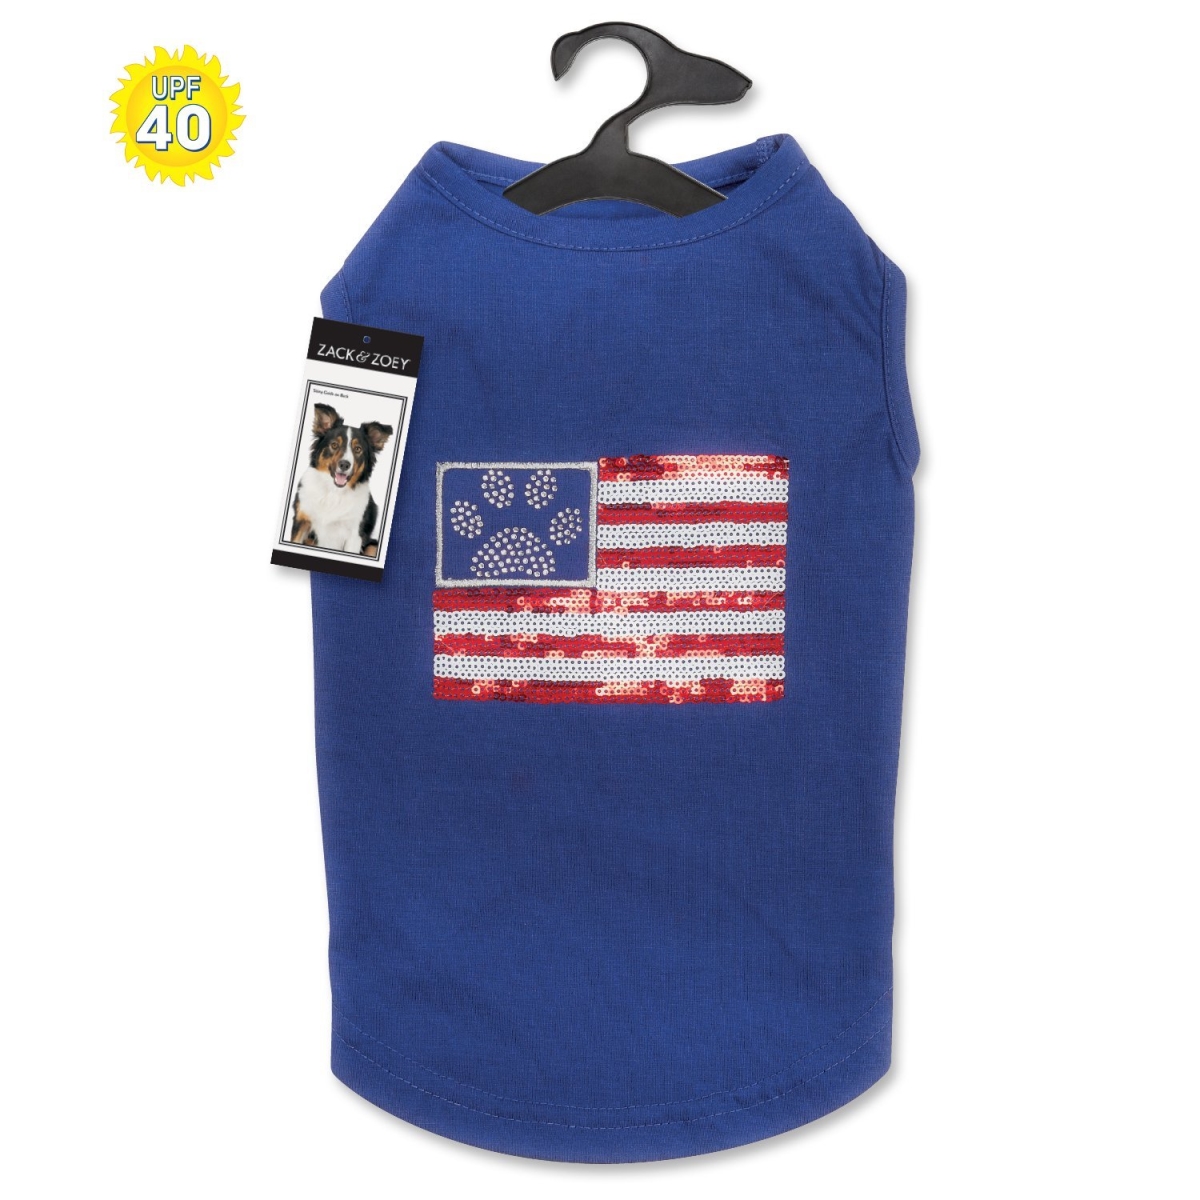 Sequin Flag Upf40 Tank Top For Dogs, Blue - Small